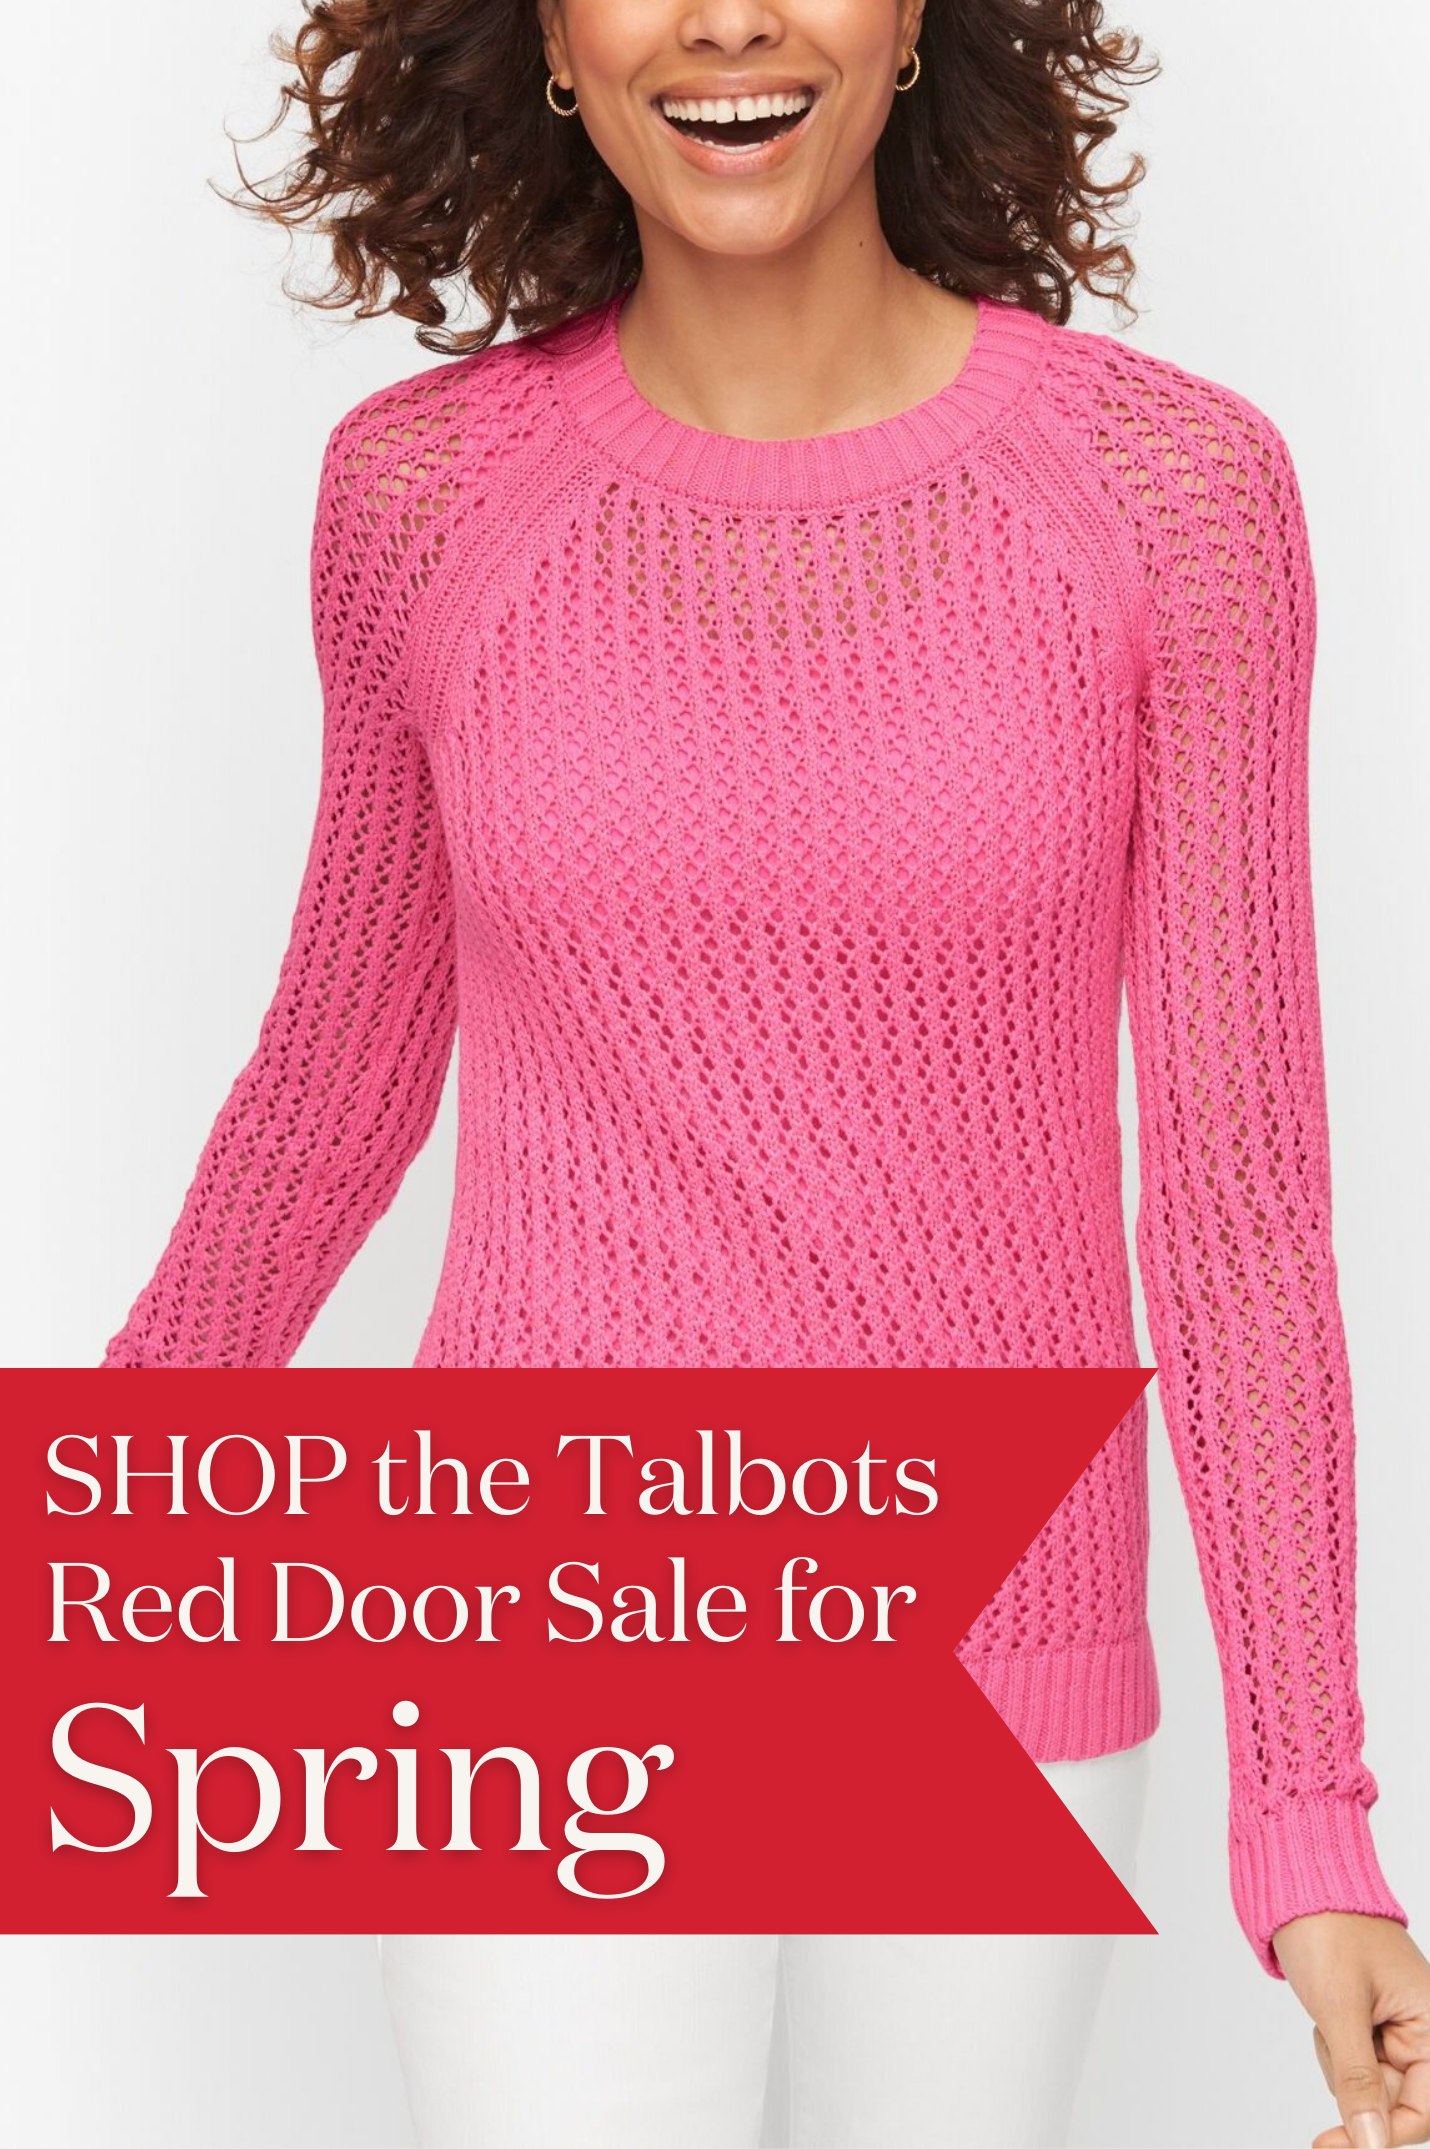 Shop the Red Door Sale for Spring